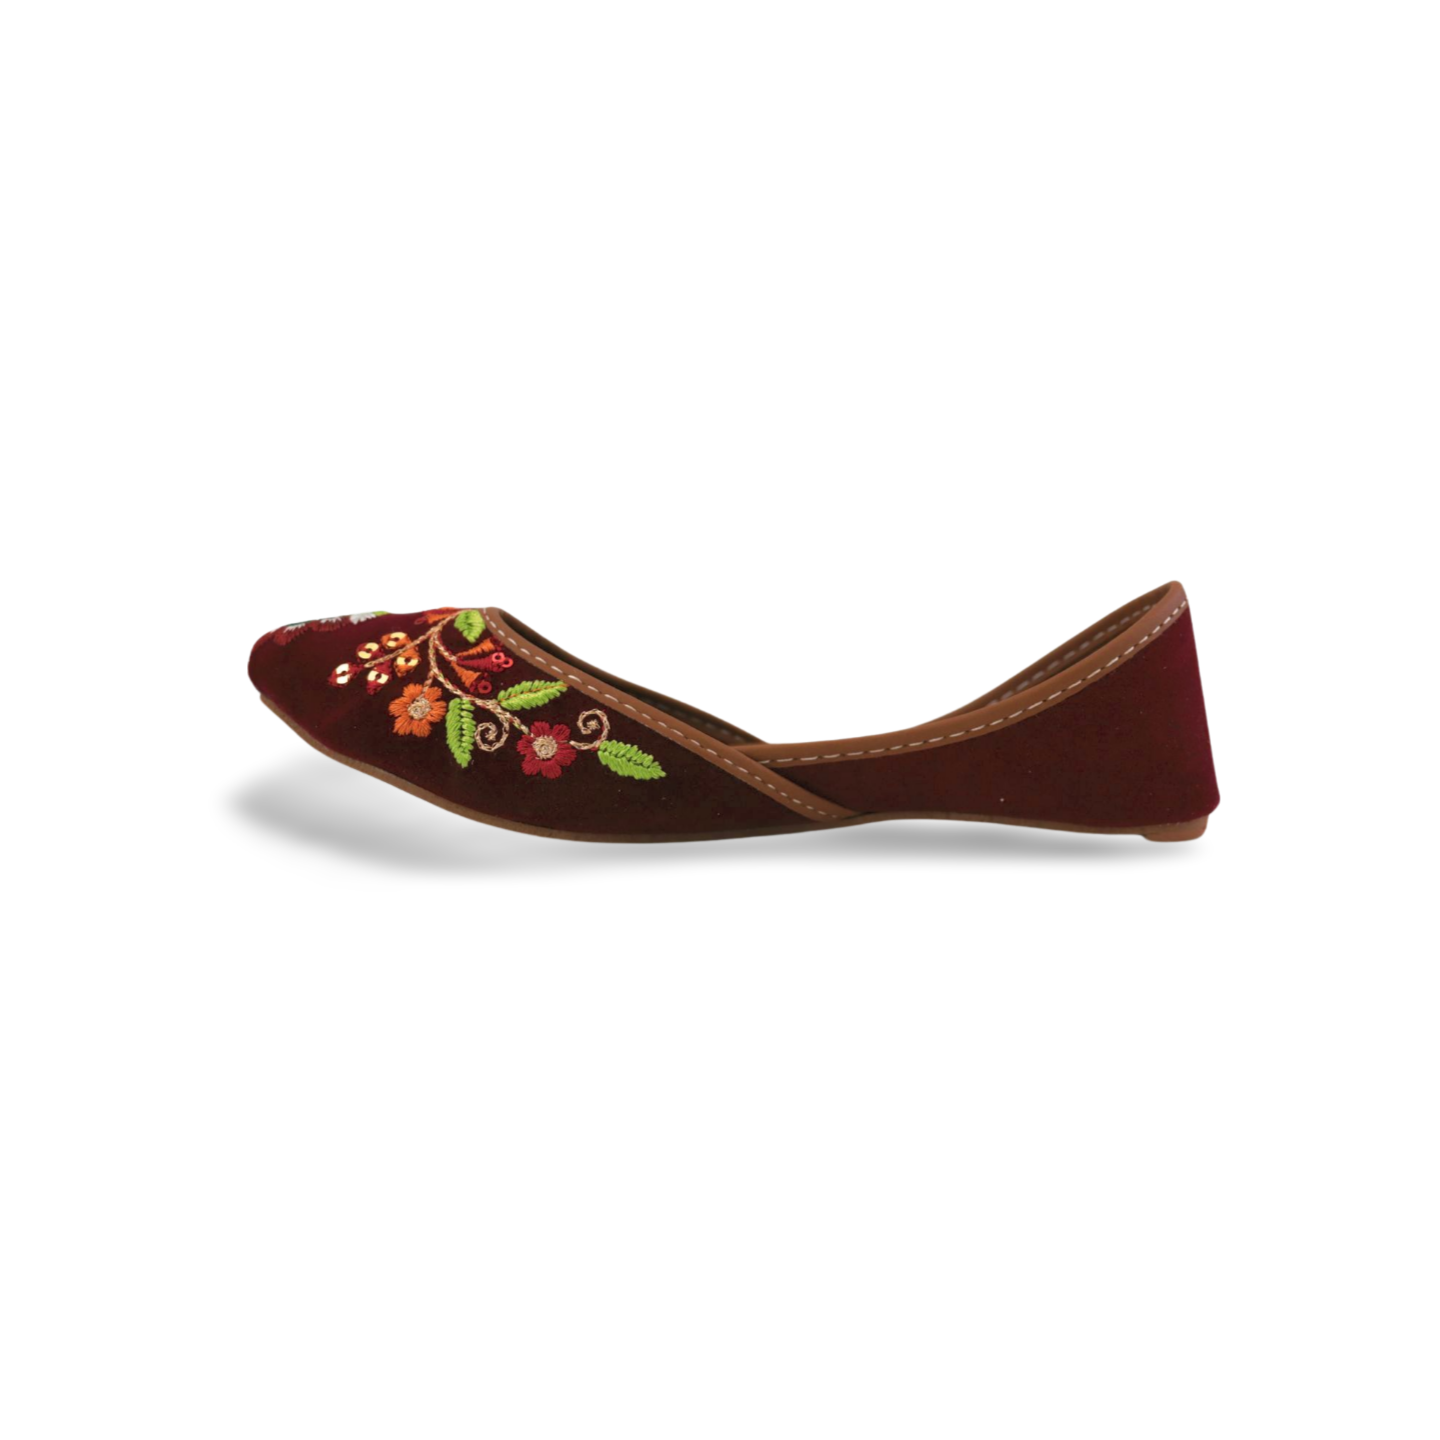 Women's Floral Embroidered Khussa Shoes  - Stylish and Comfortable for Any Occasion